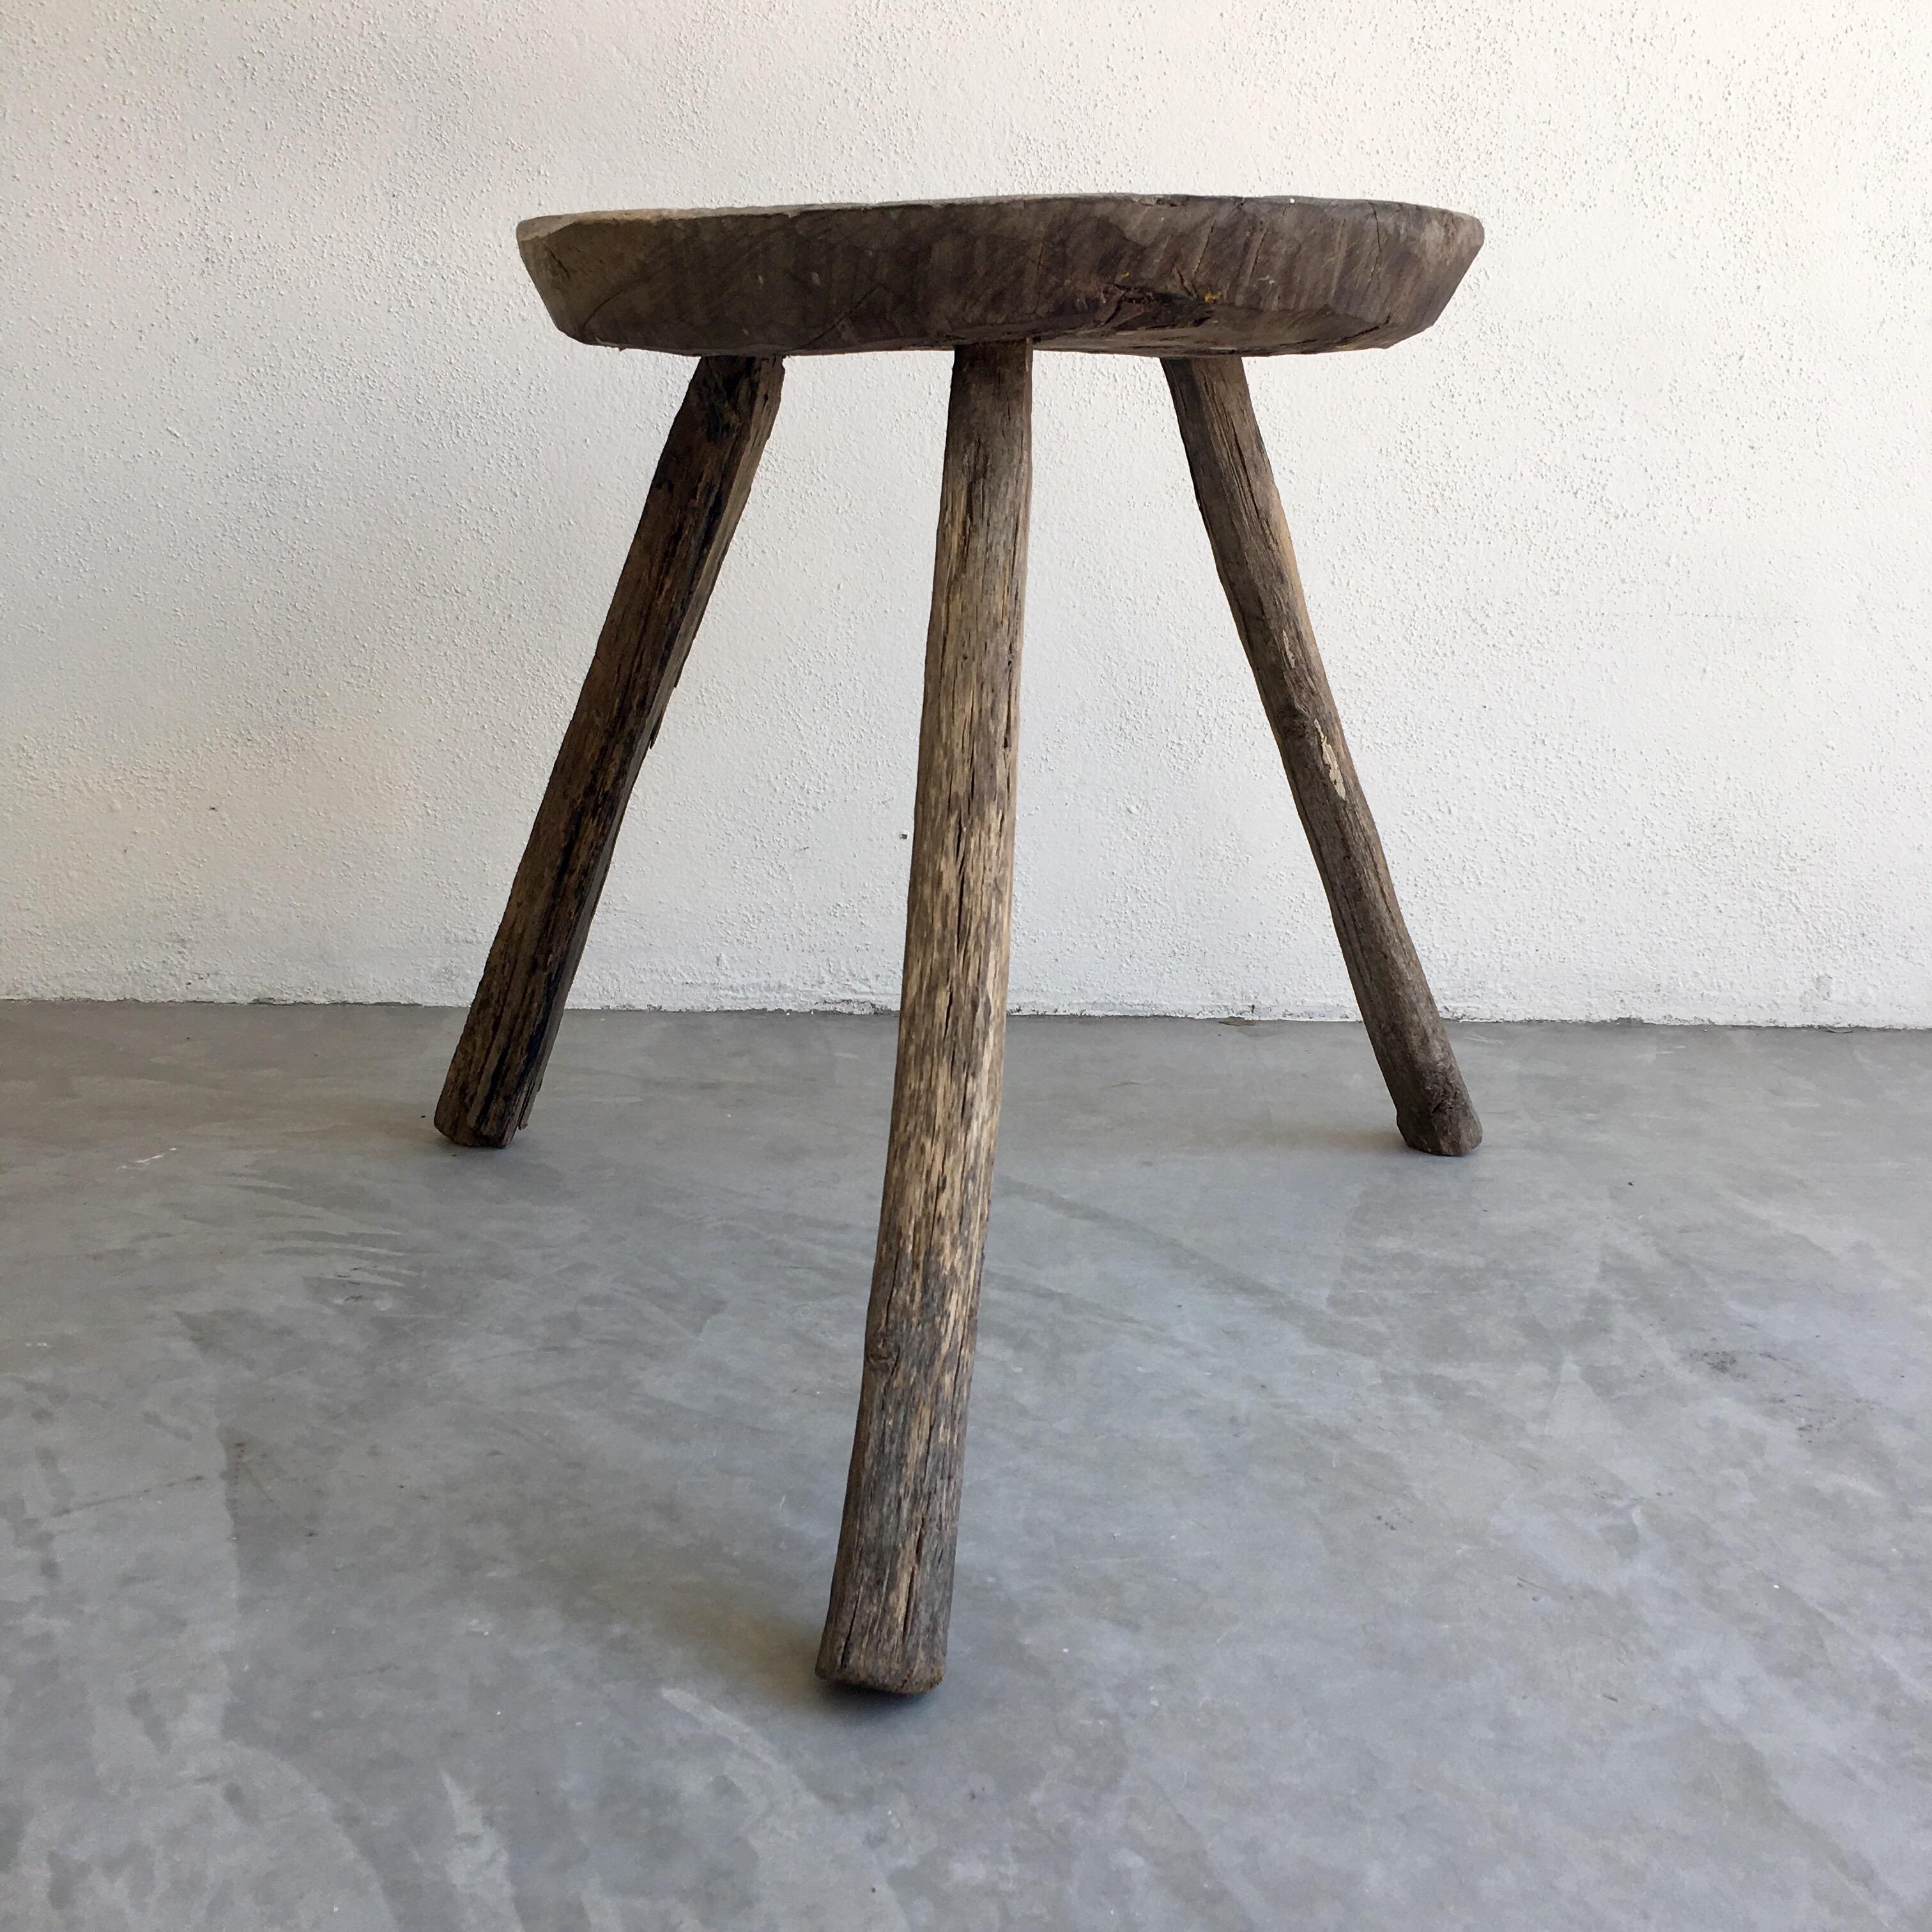 Tripod wood stool from the San Felipe region of Guanajuato, Mexico. This item is larger than most we come across.